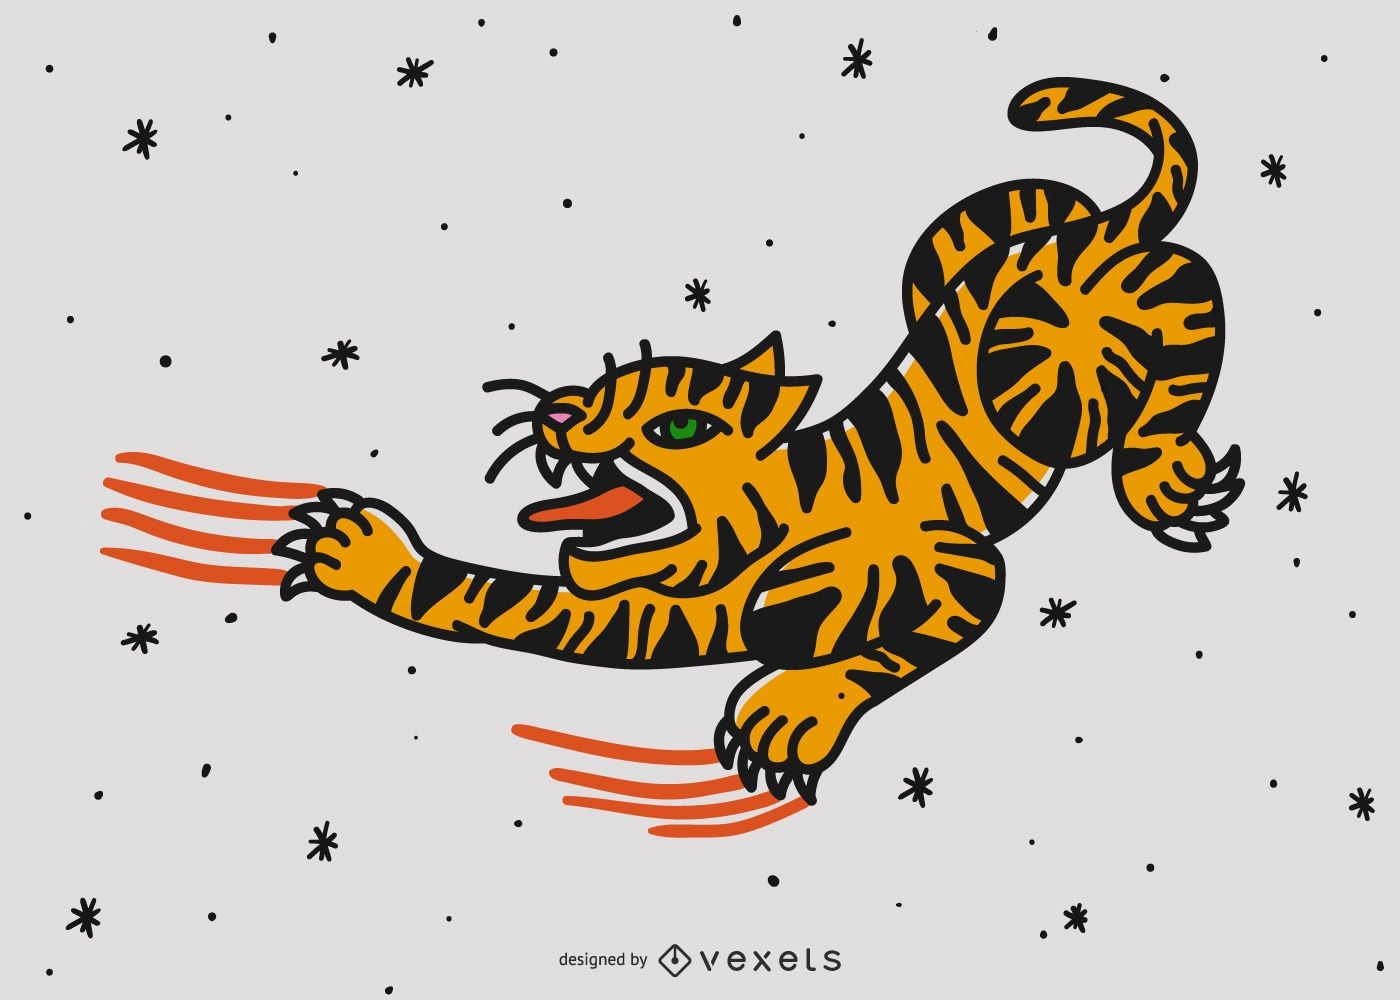 FREE TATTOO STYLE VECTOR TIGER